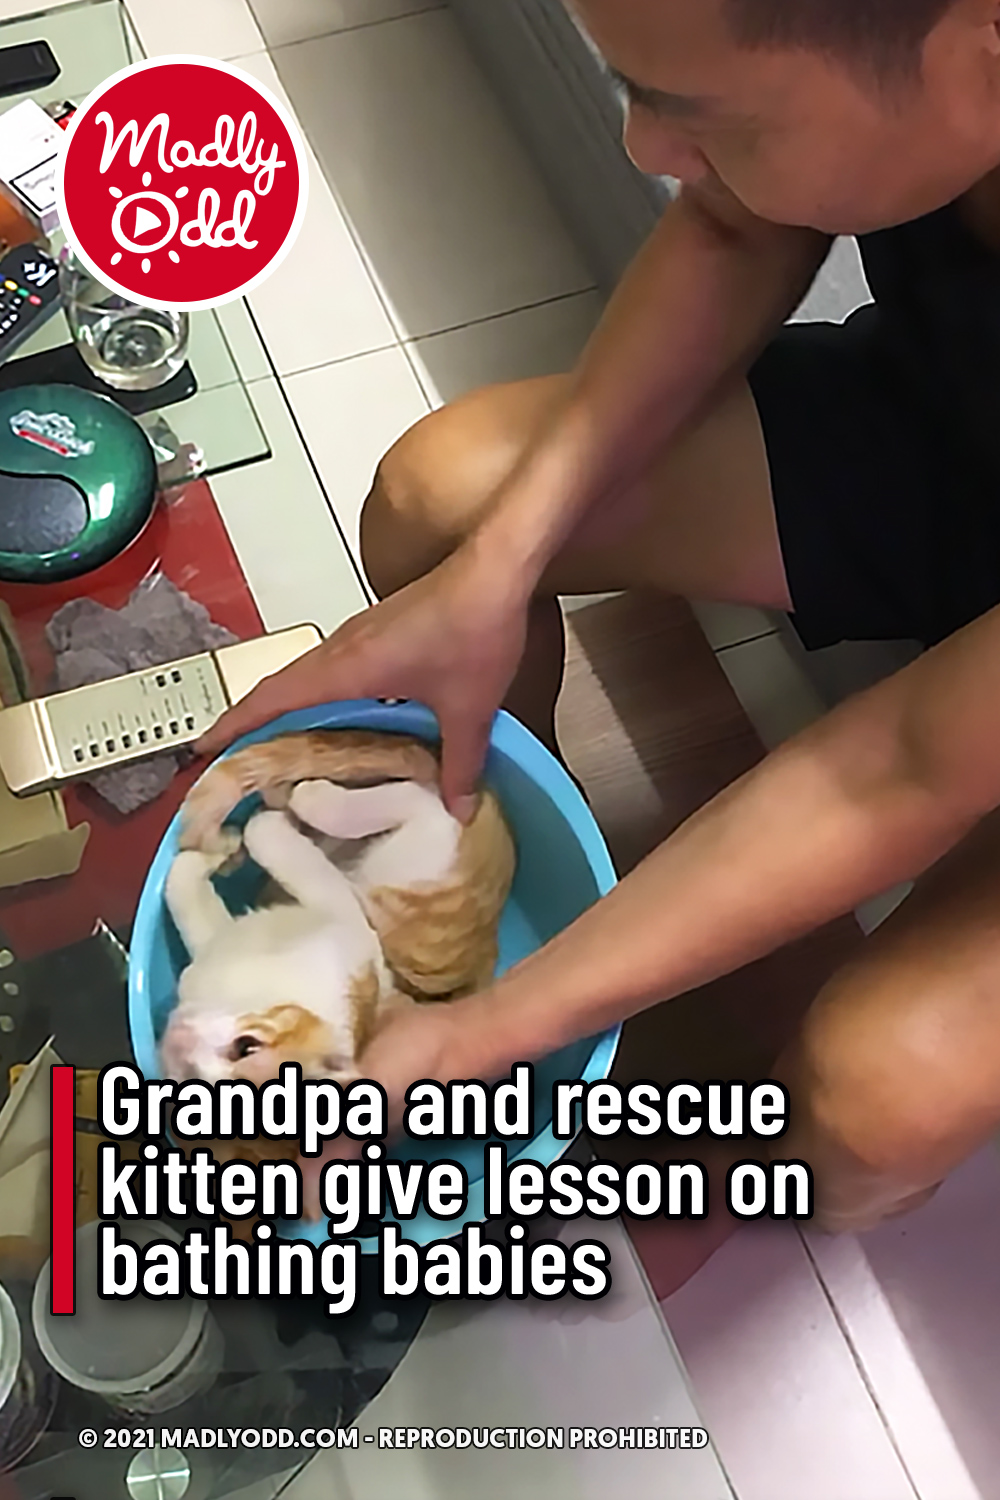 Grandpa and rescue kitten give lesson on bathing babies